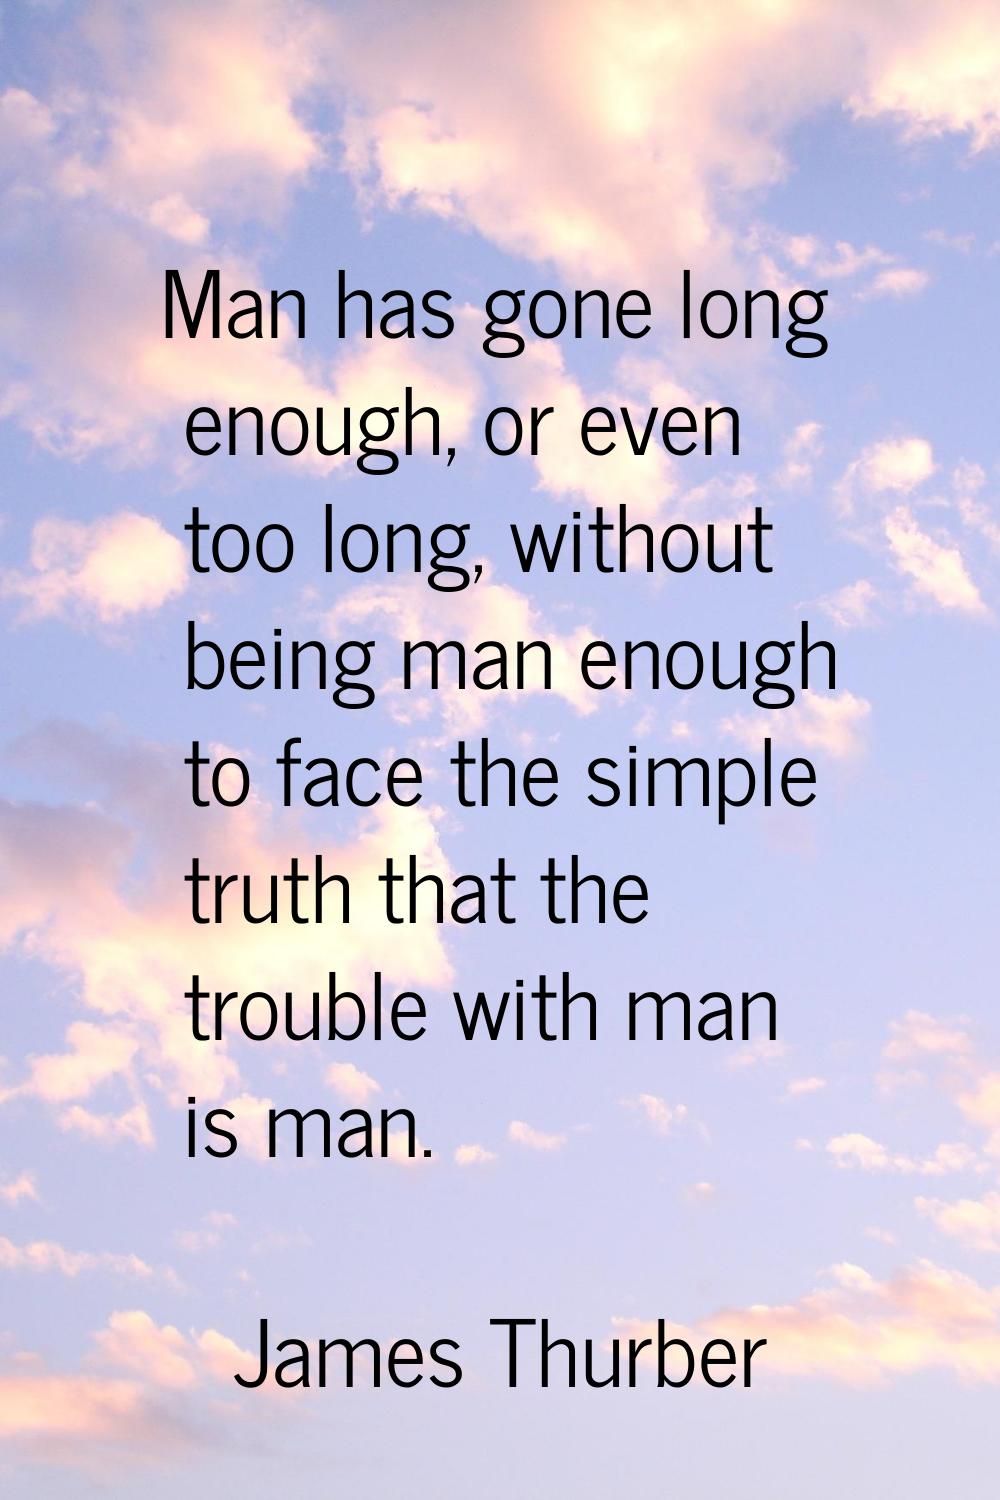 Man has gone long enough, or even too long, without being man enough to face the simple truth that 